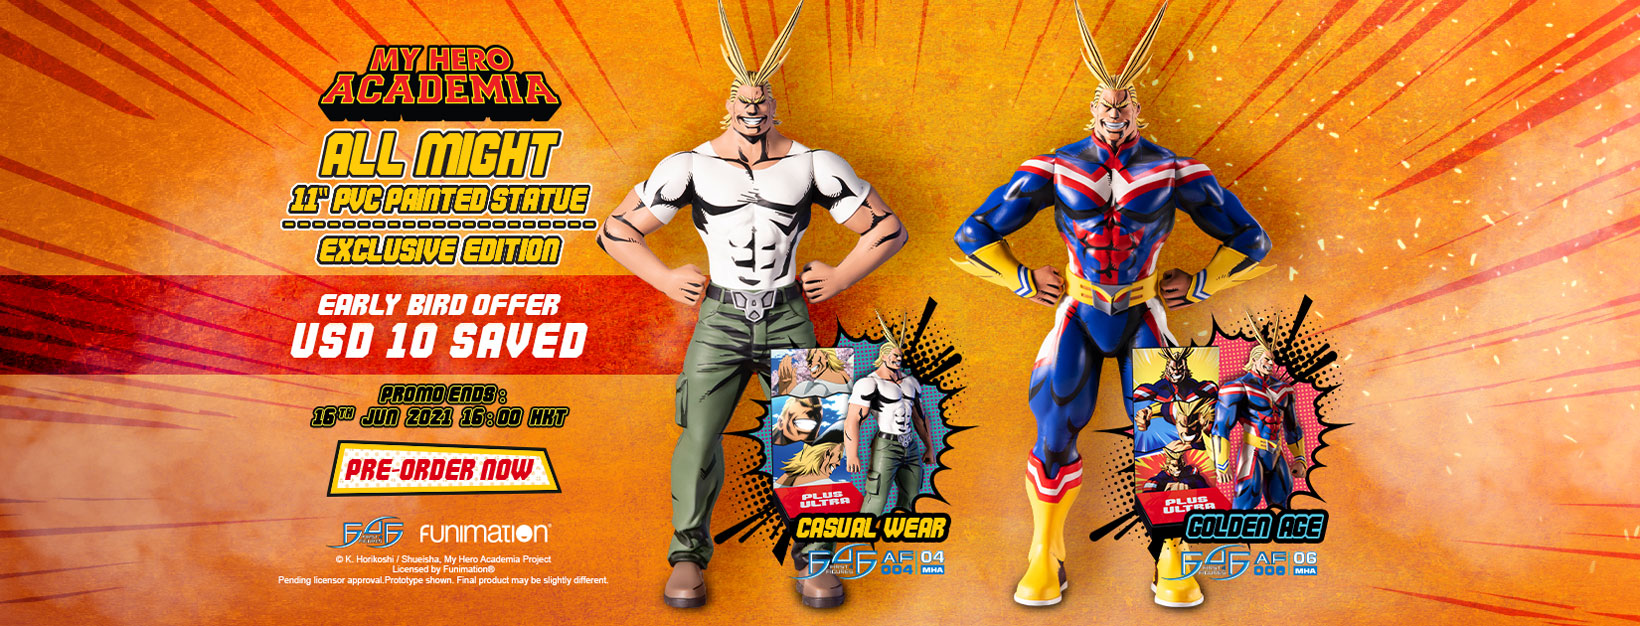 My Hero Academia – All Might: Golden Age and All Might: Casual Wear PVC action figures Early Bird Offer